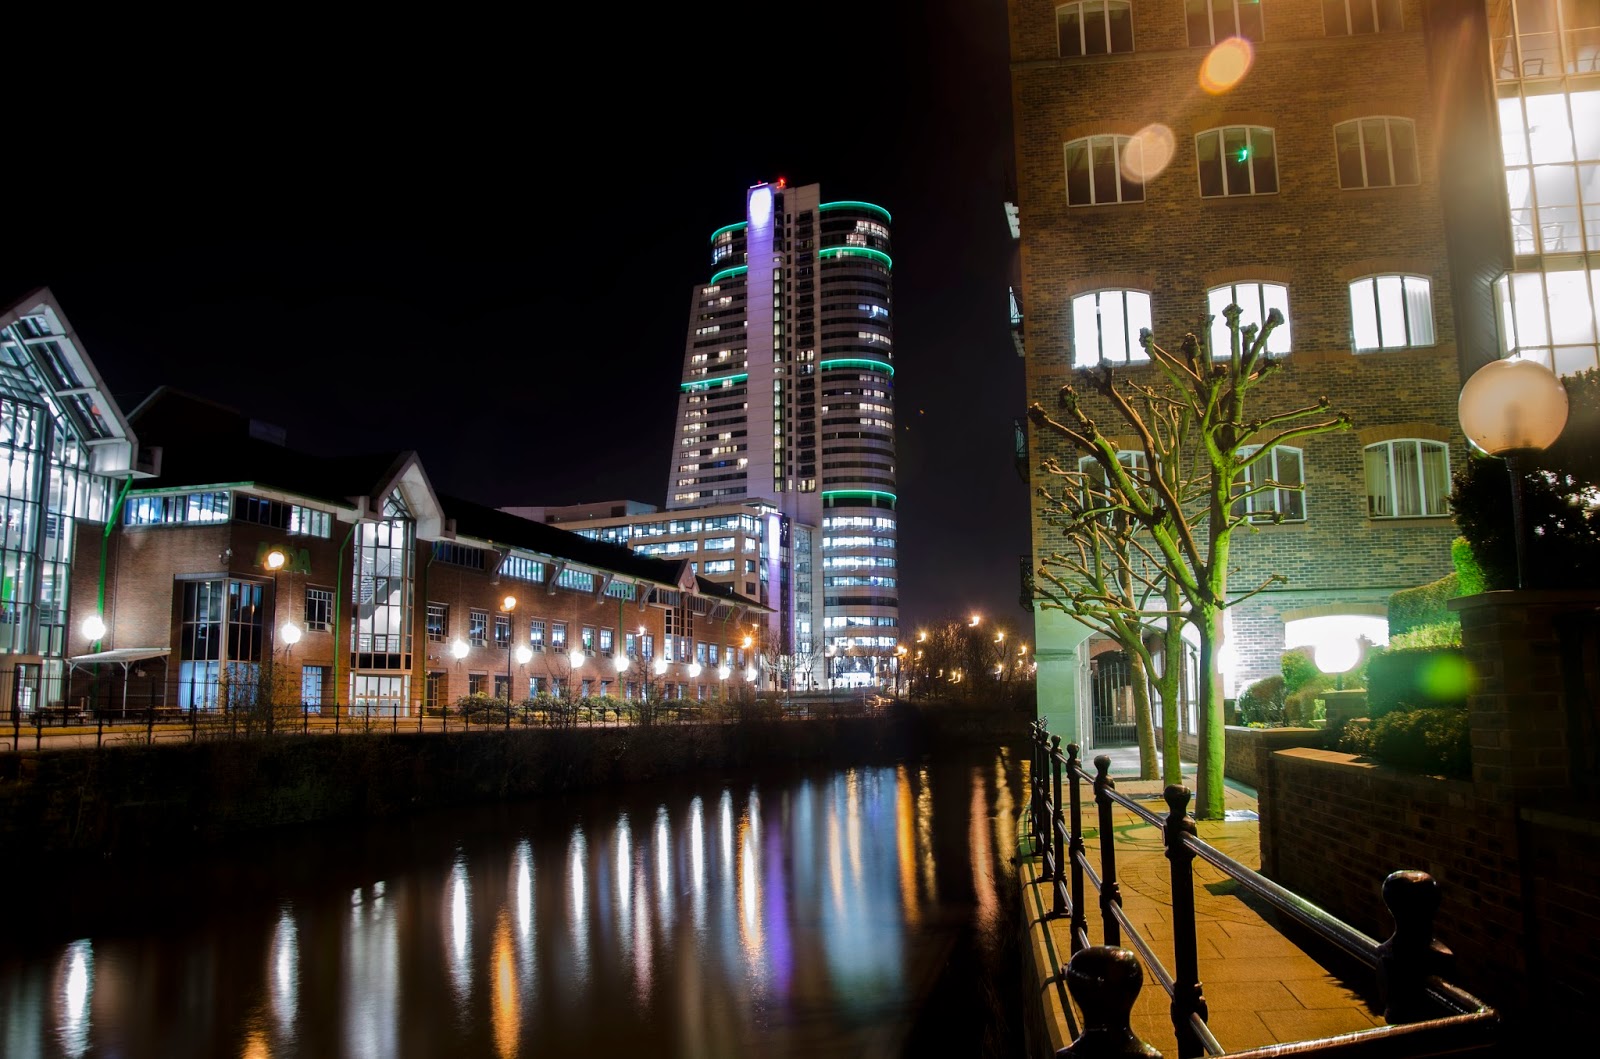 Leeds Digital Festival will be close by the river Aire